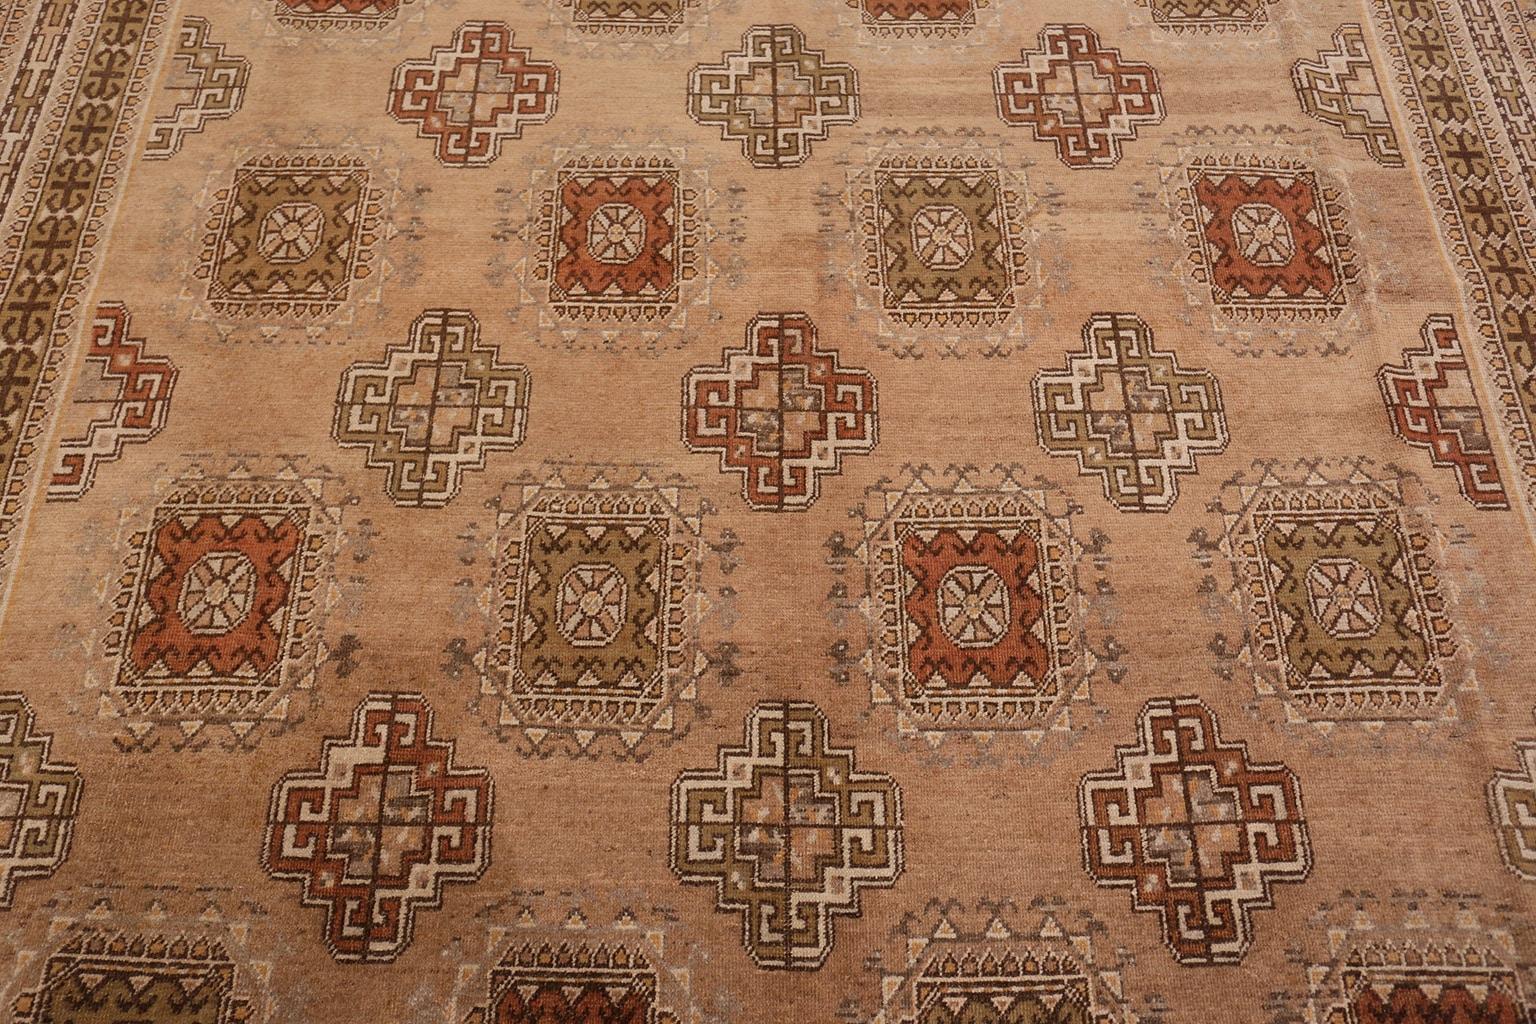 Beautiful Large Tibal Design Gallery Size Antique Khotan Rug, Country of Origin: East Turkestan, Circa Date: Turn of the 20th Century (around 1900) – This spectacular antique Khotan rug has a classic Turkoman design of large and small faceted